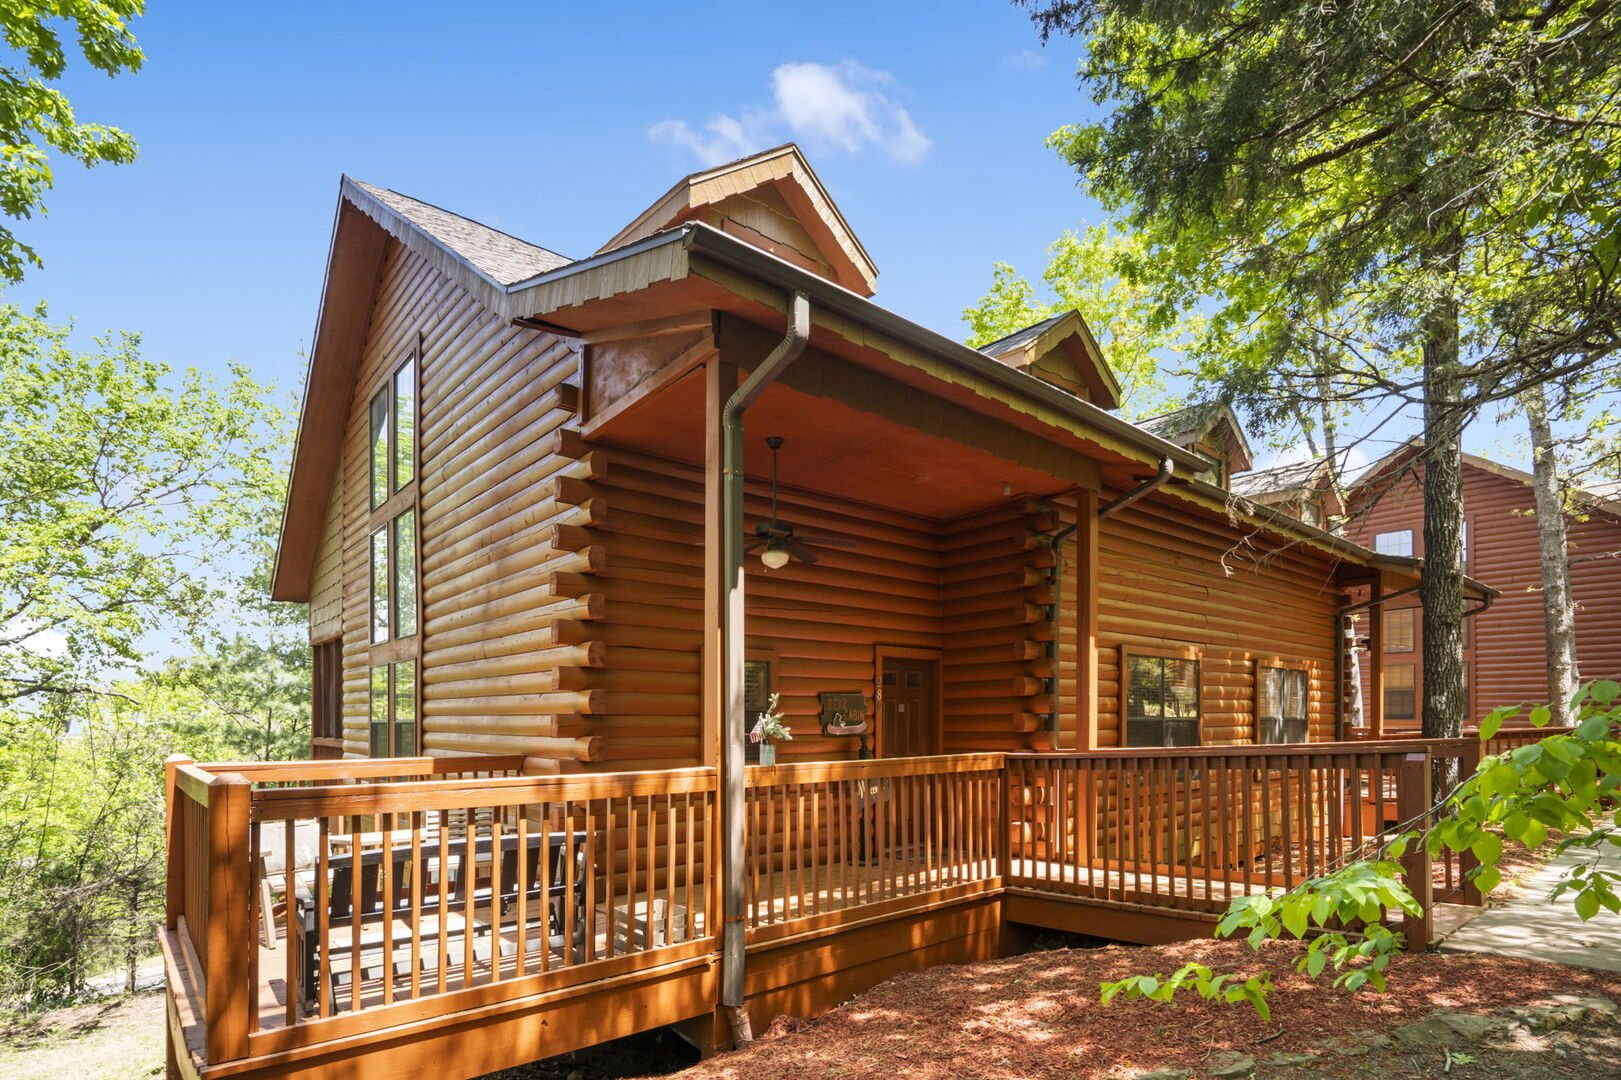 2 Bed, 2 Bath Log Cabin in the Heart of Branson